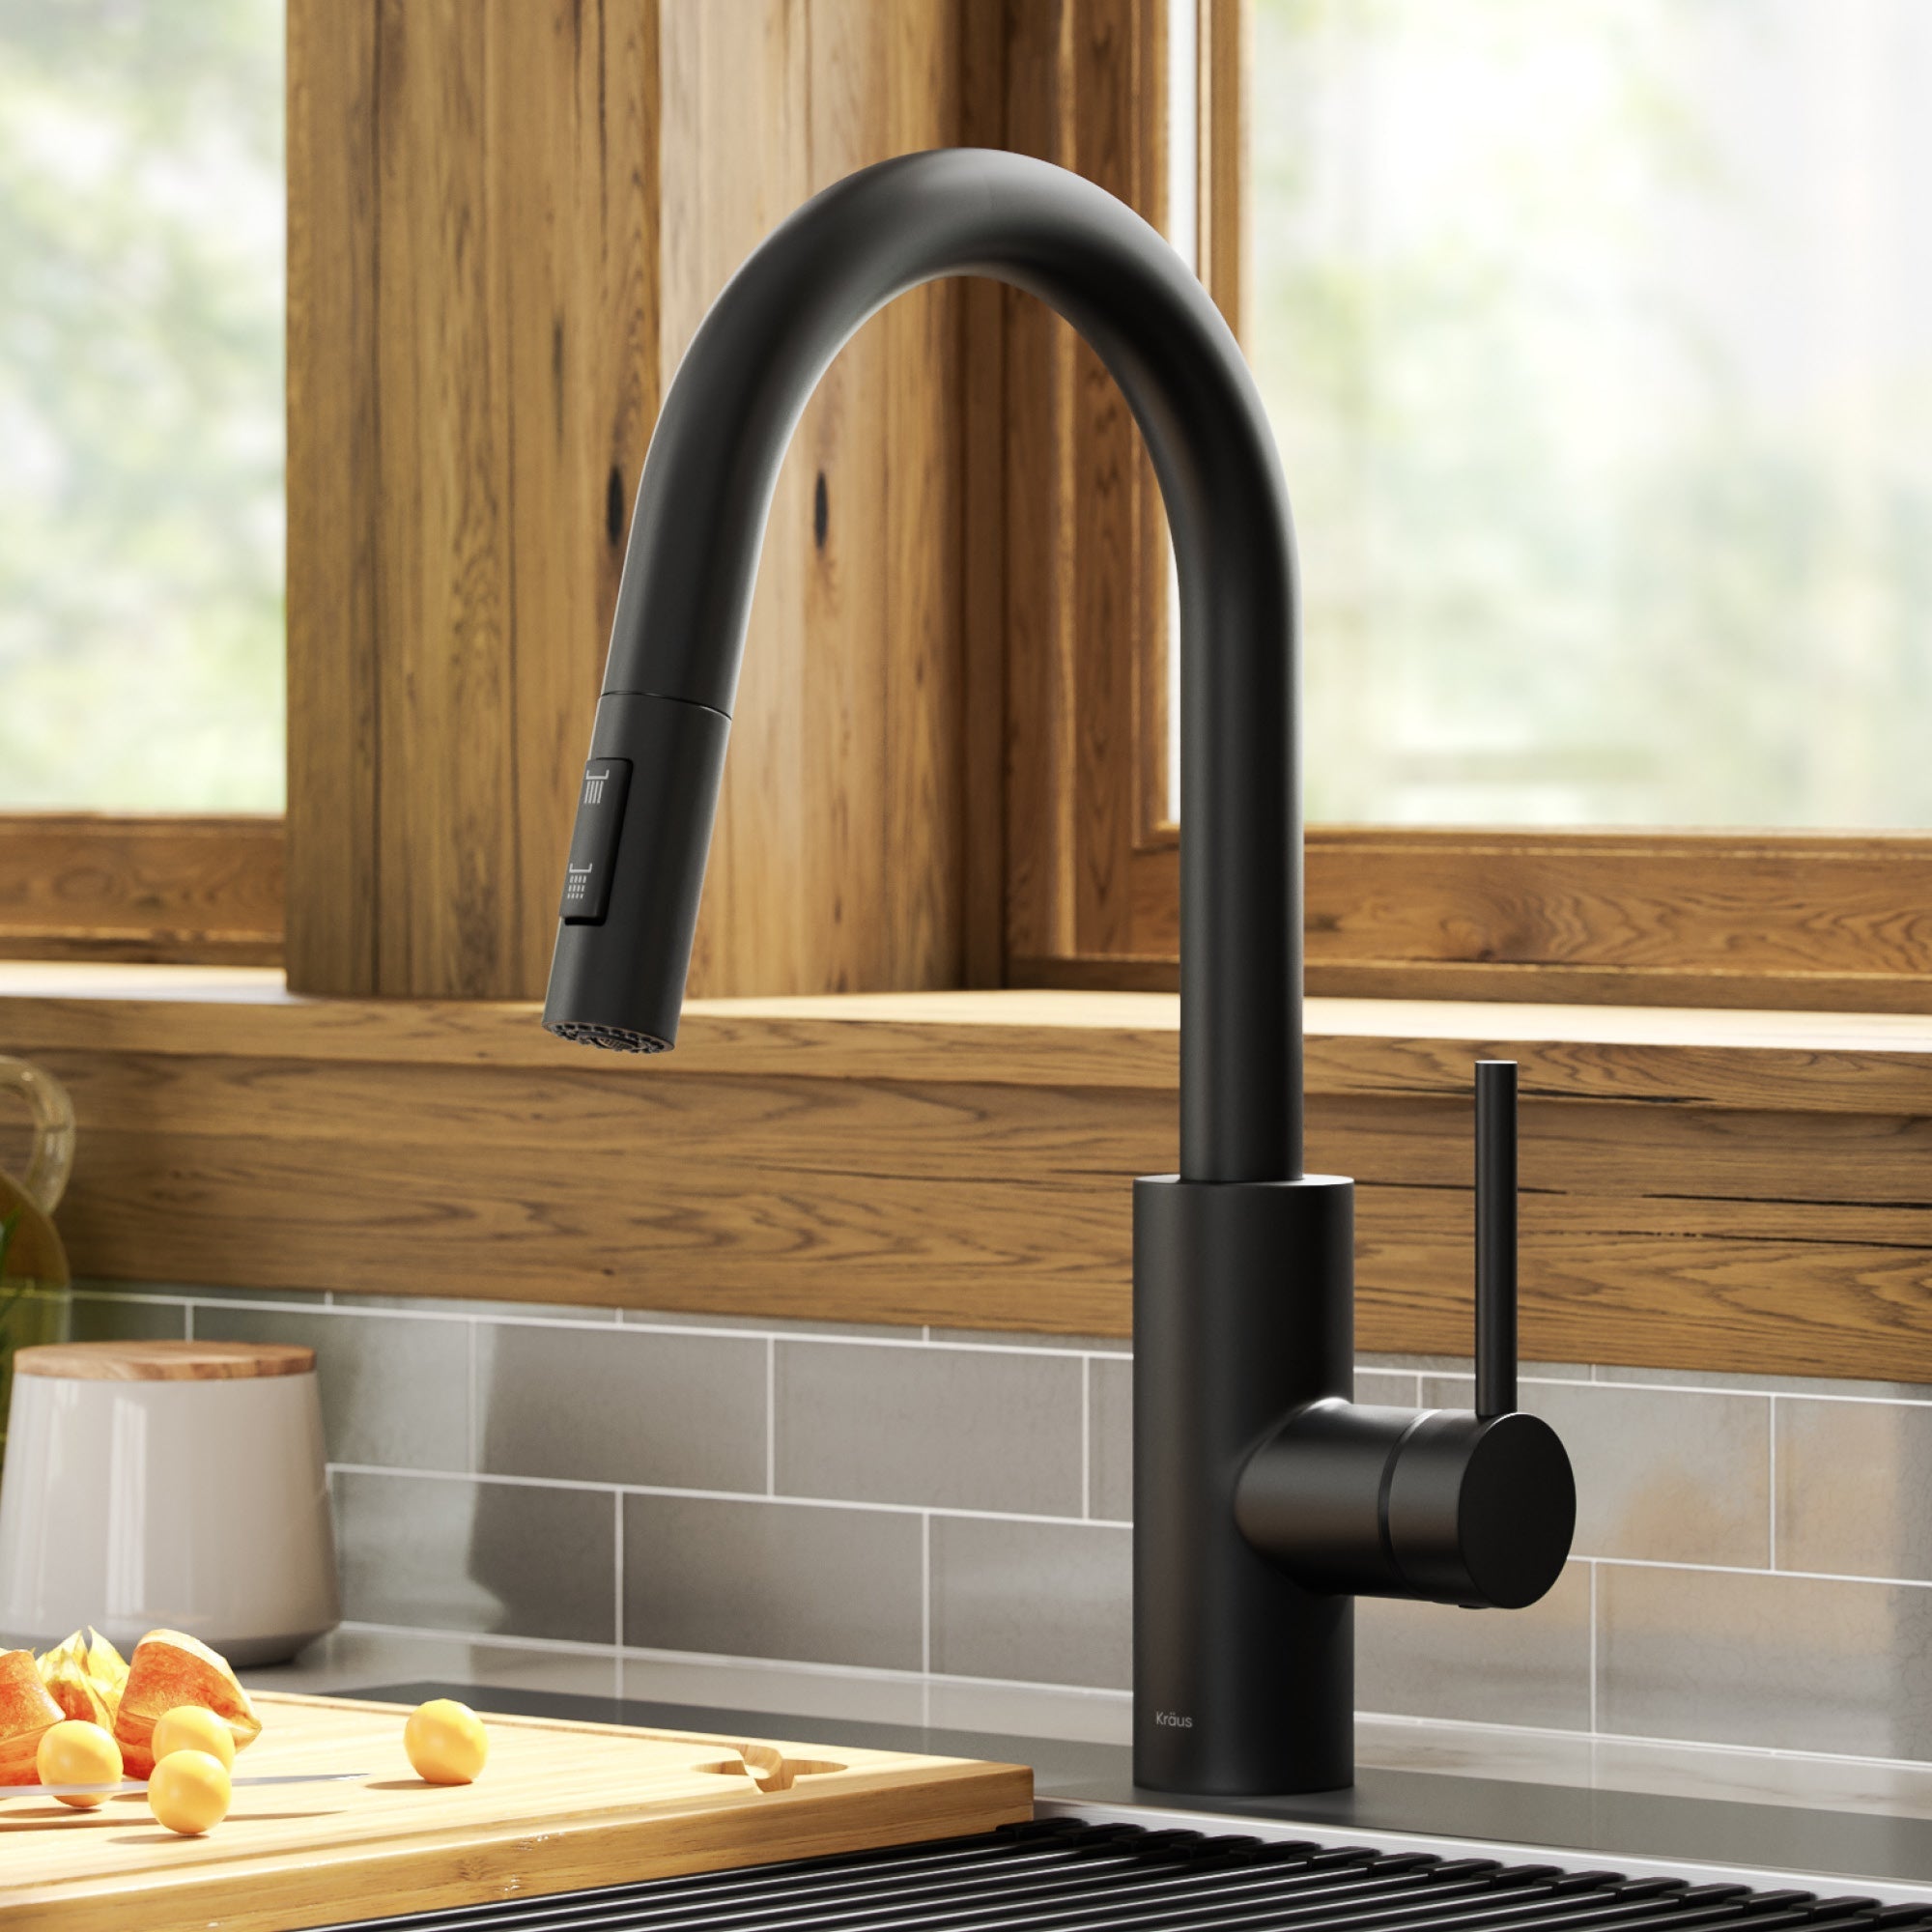 How to Clean a Faucet Head and Your Sink's Handles